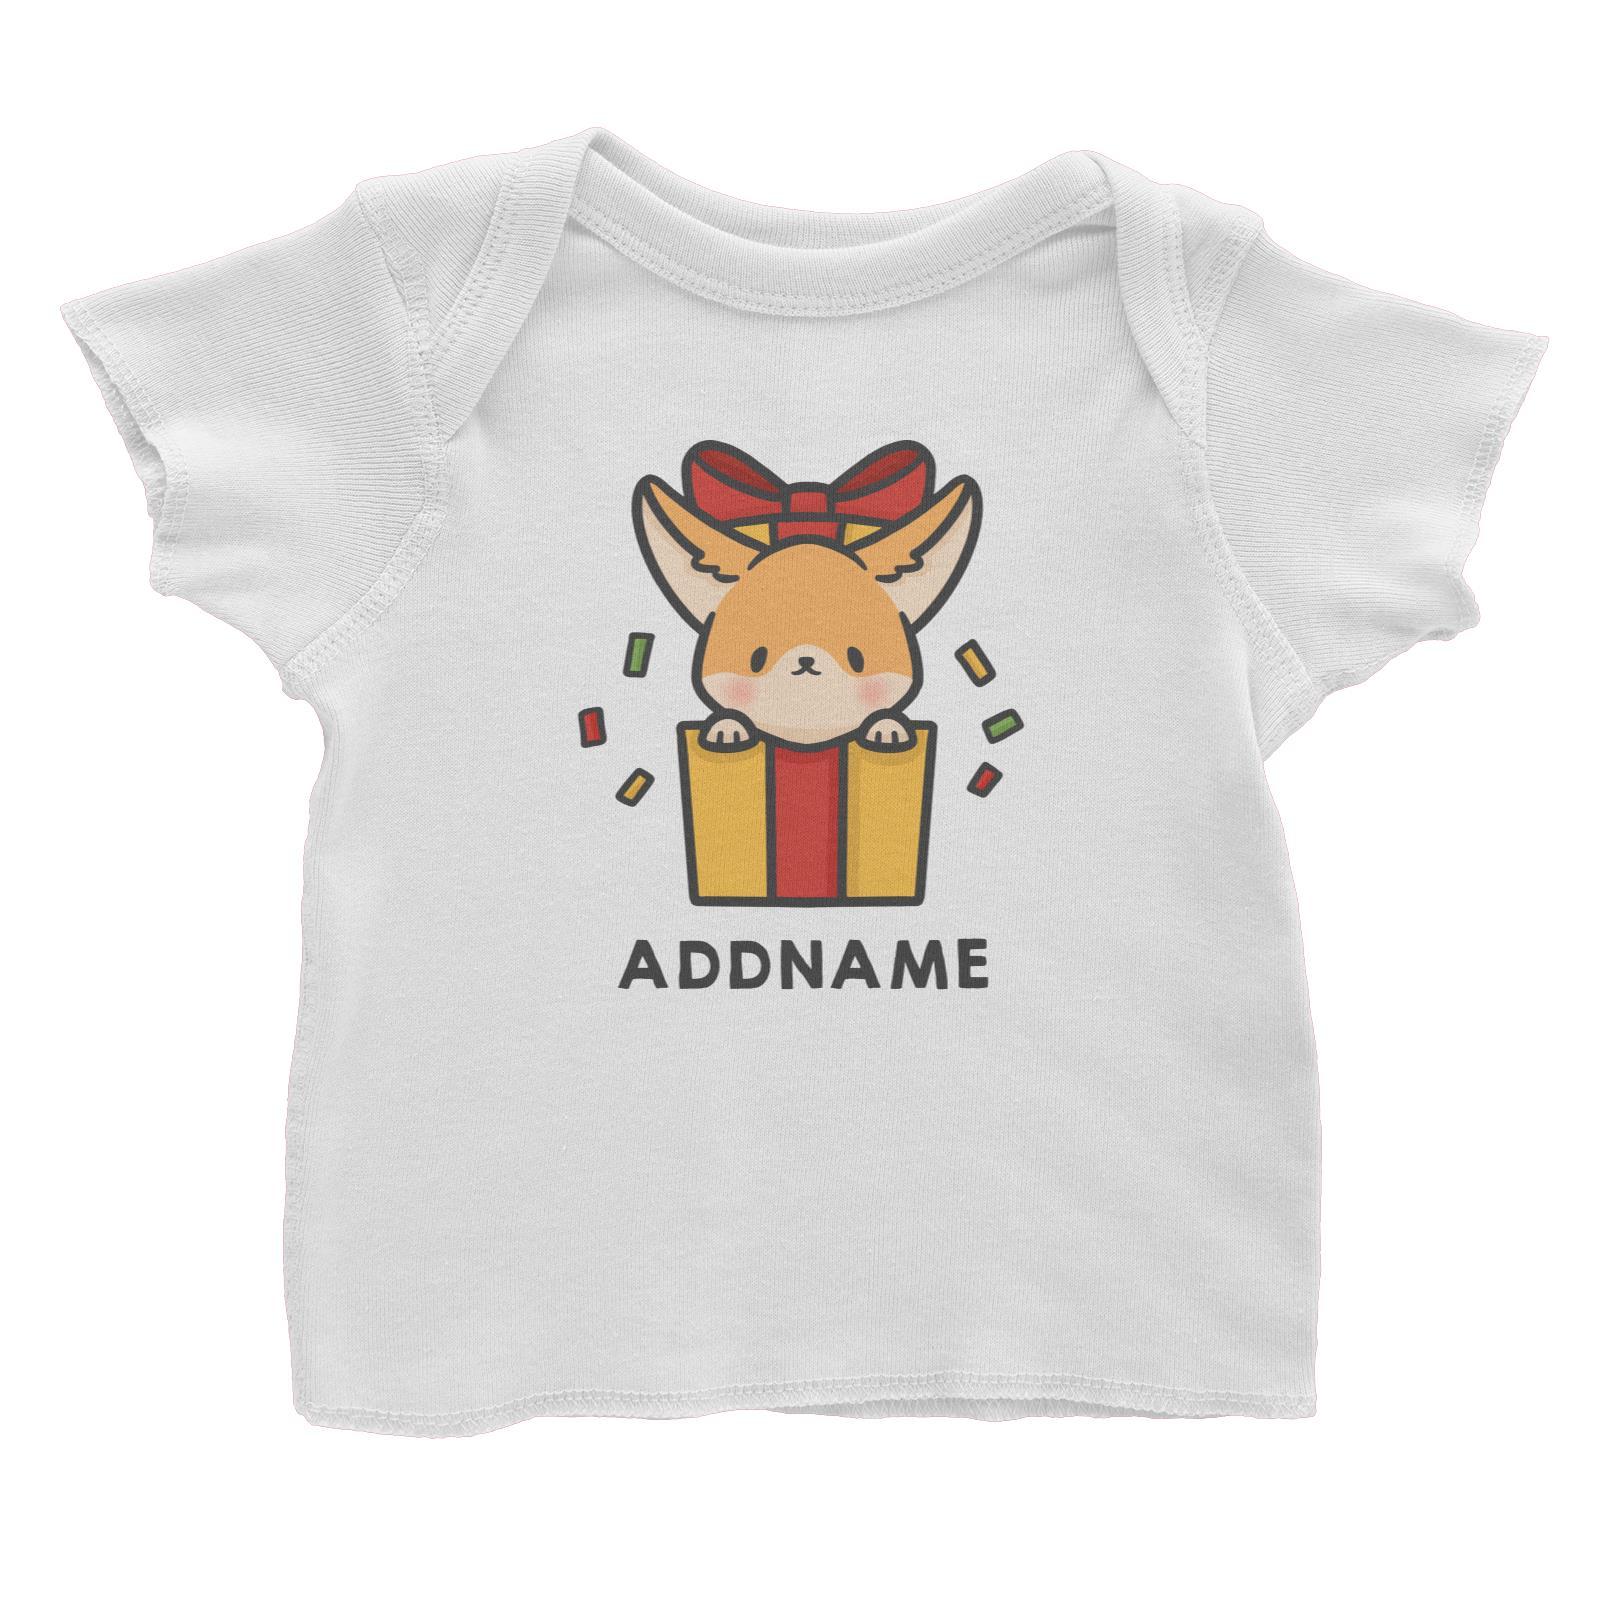 Xmas Cute Dog In Gift Box Addname Accessories Baby T-Shirt